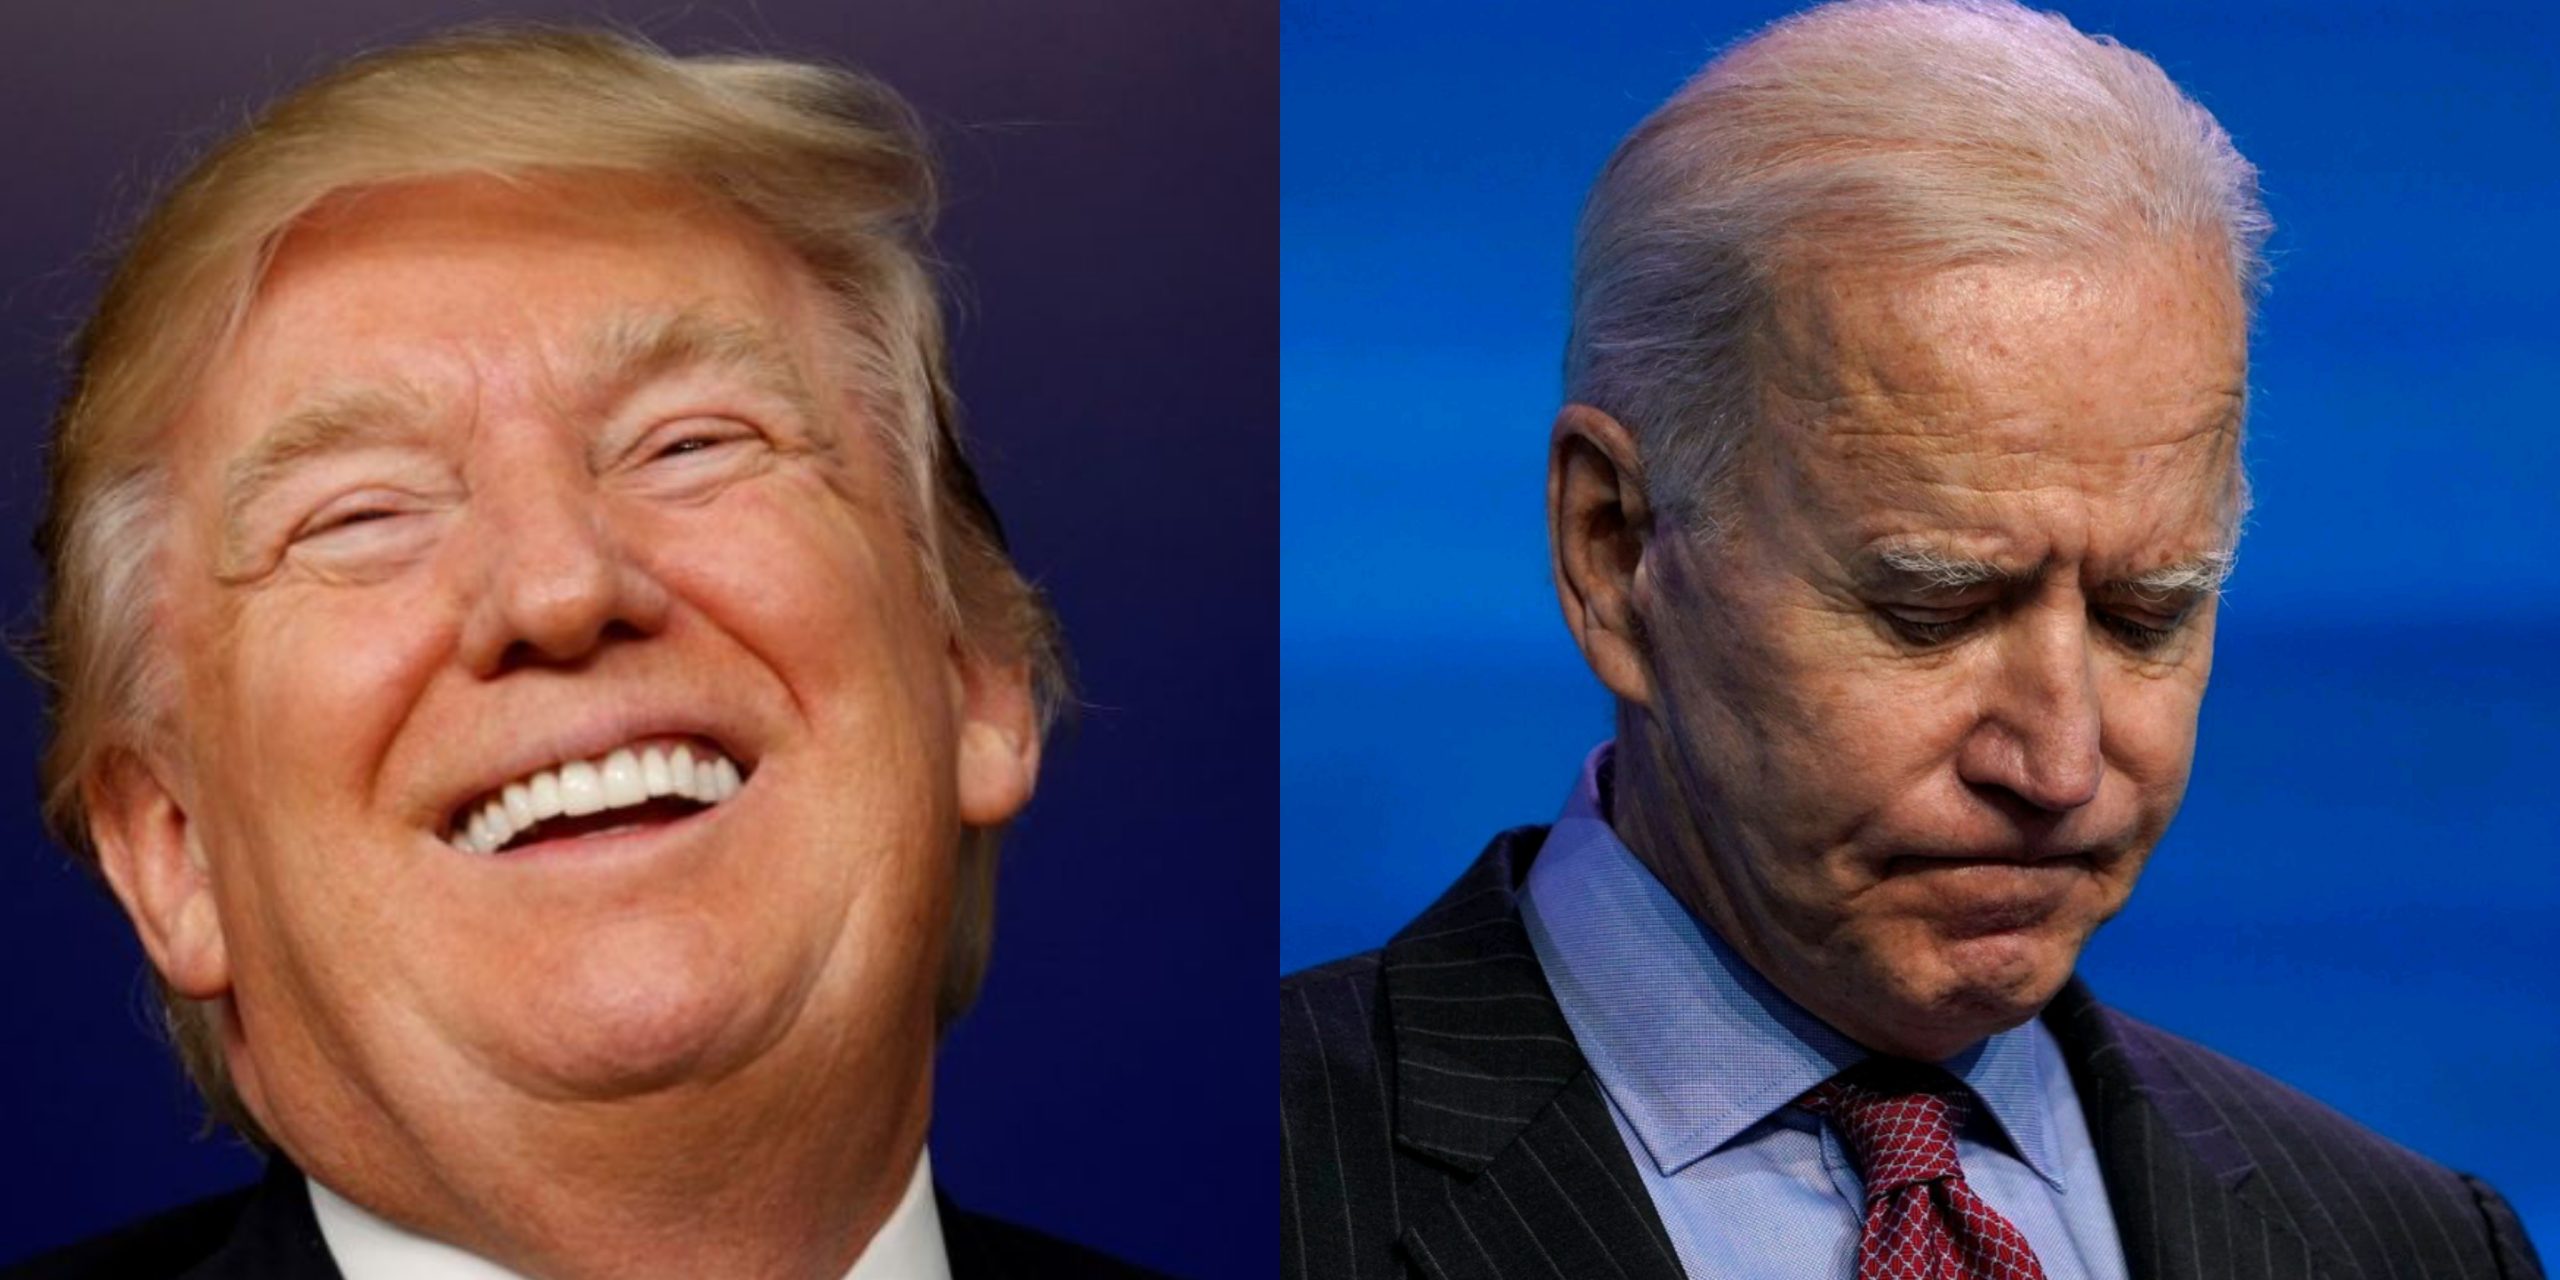 Donald Trump reacts as Biden withdraws from US Presidential race